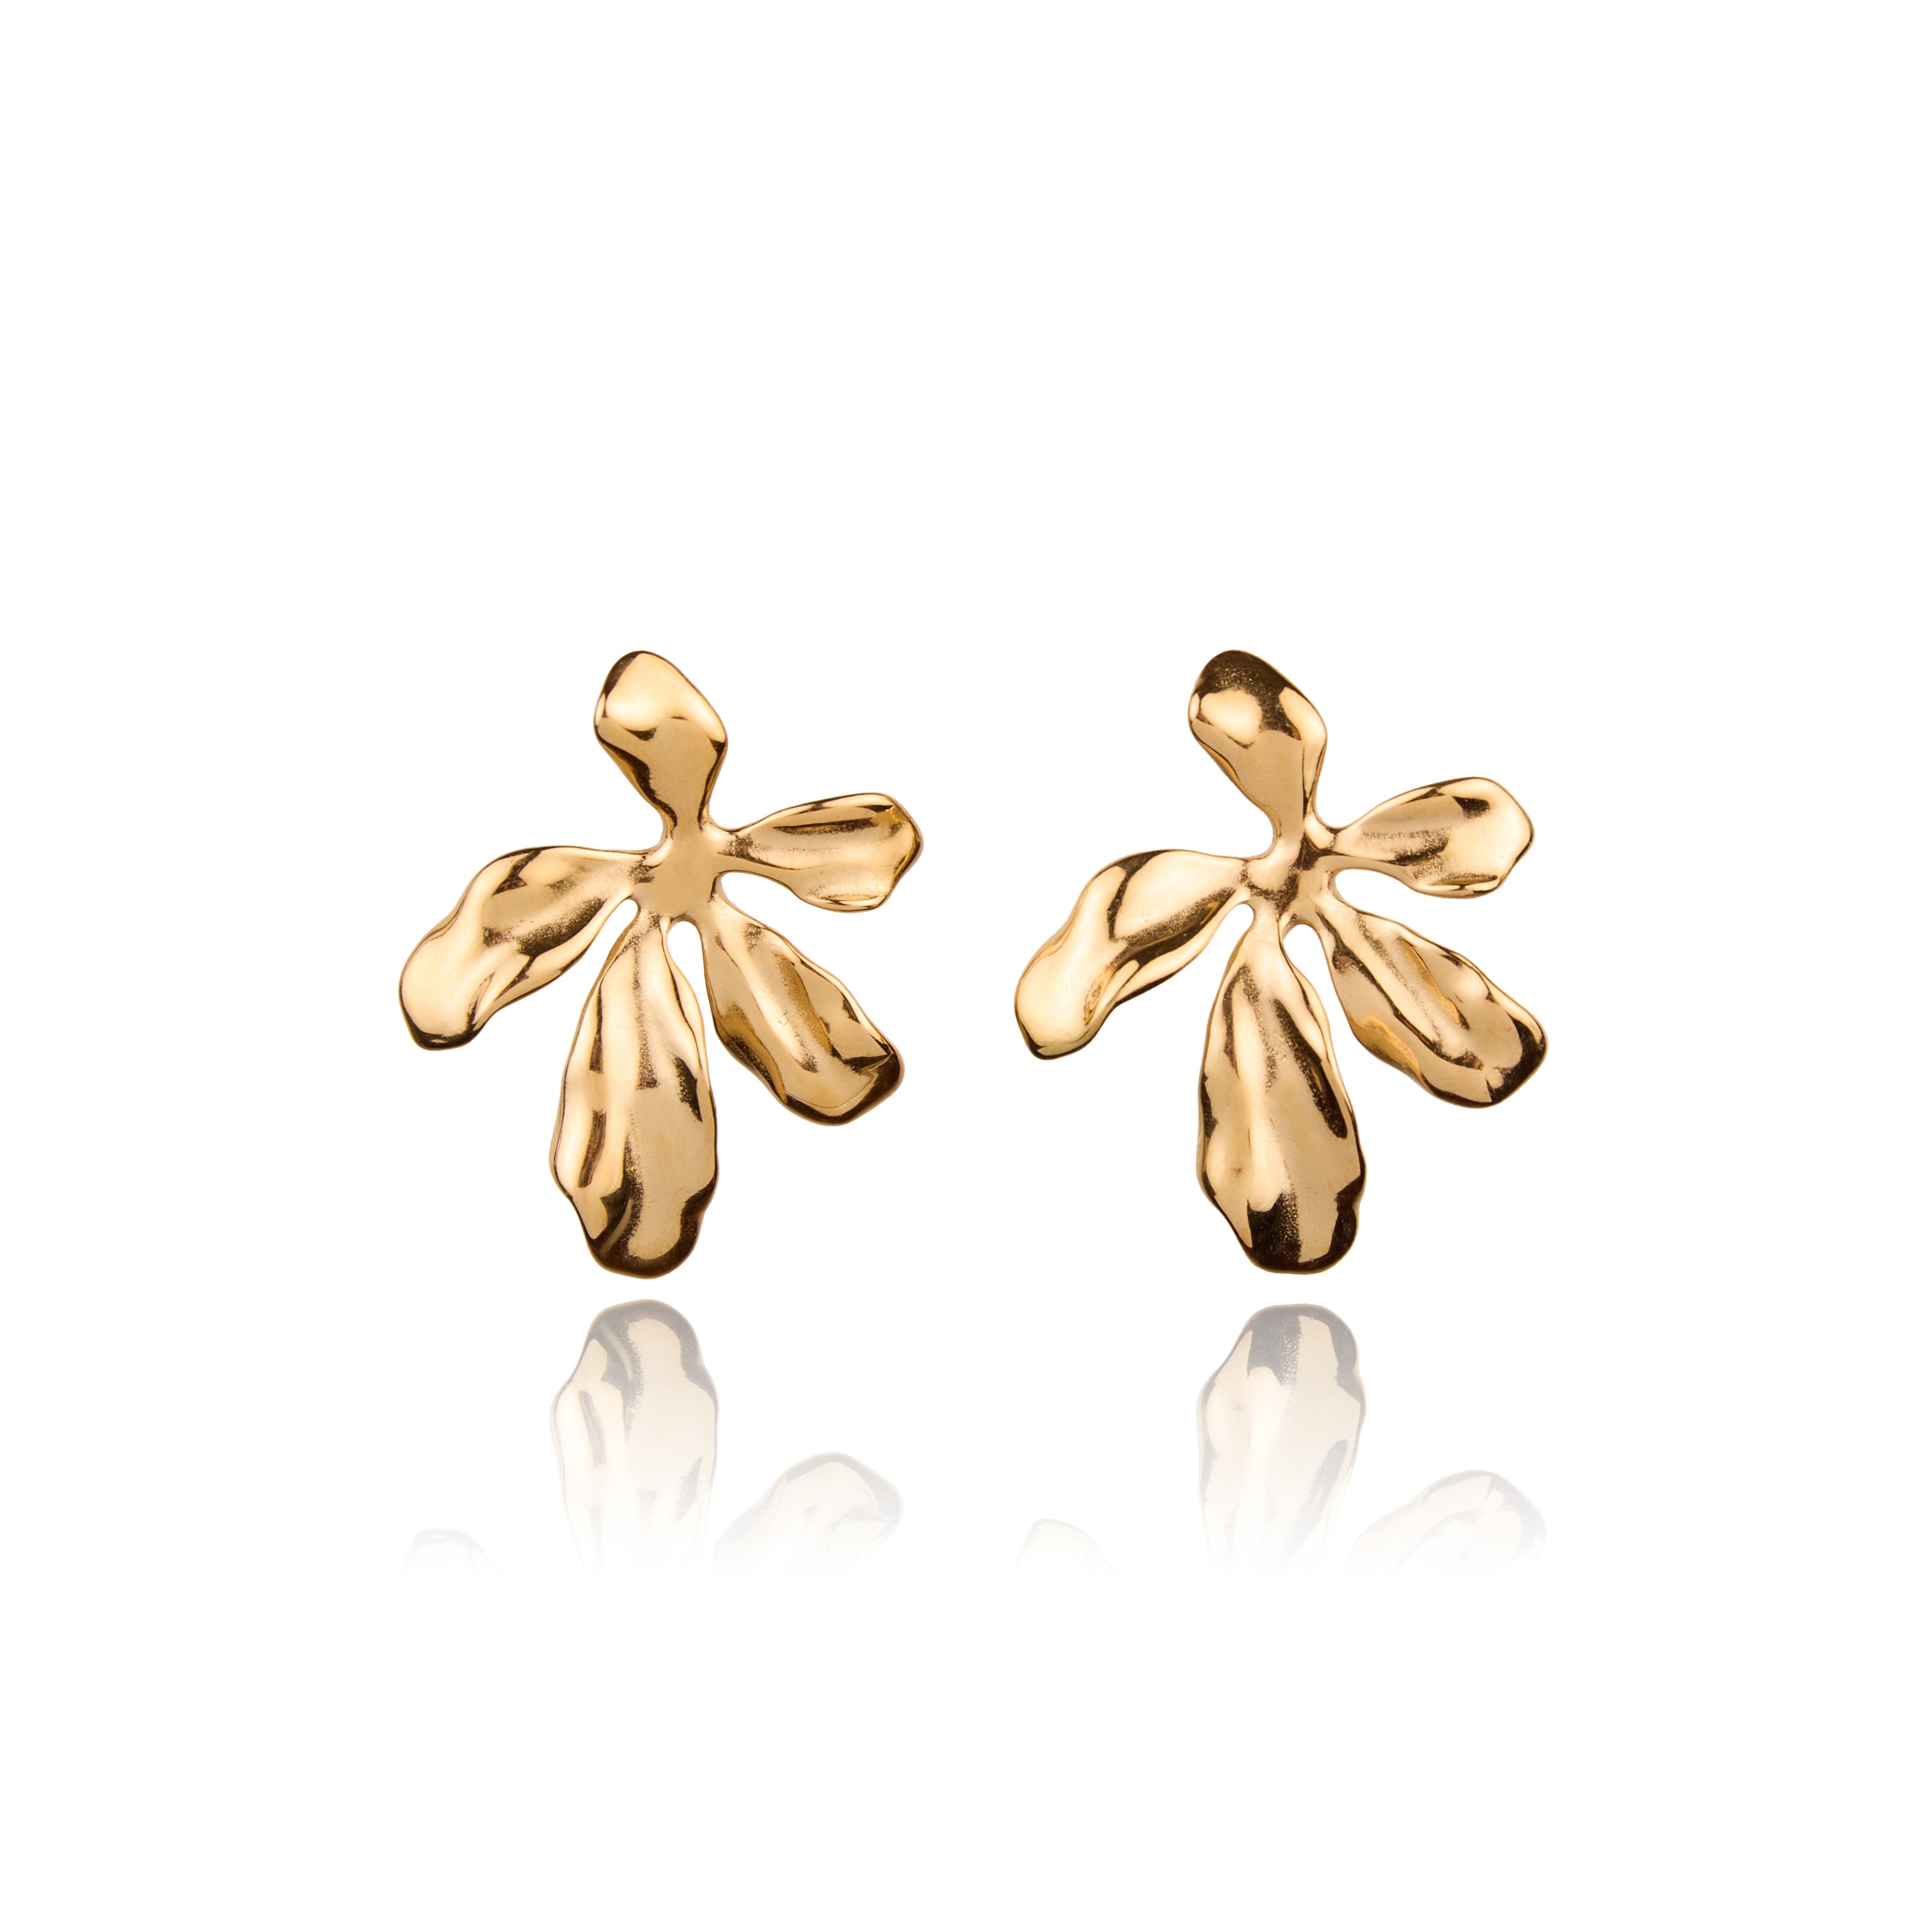 Capture the essence of nature with our Malibu Earrings.These earrings bring a sense of freshness and femininity to any ensemble. Perfect for garden parties or brunch dates, these earrings are a beautiful reminder of the beauty that surrounds us.  18k gold plated on stainless steel. All the earrings come in a beautiful jewelry pouch.